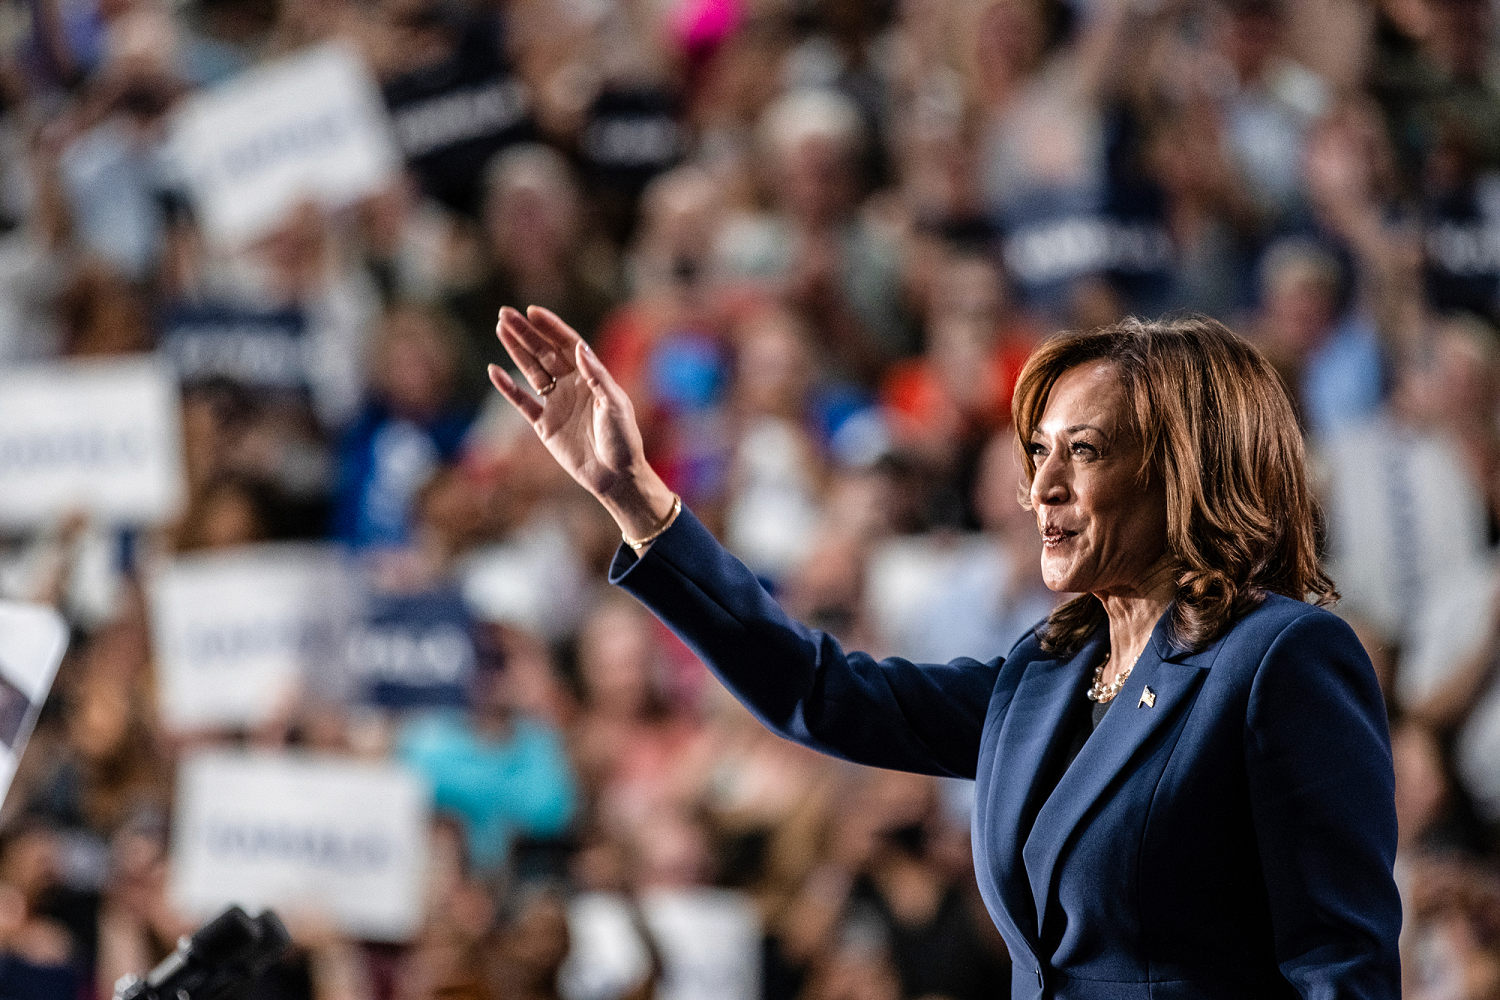 Harris has to recapture the young Latino voters Biden was losing